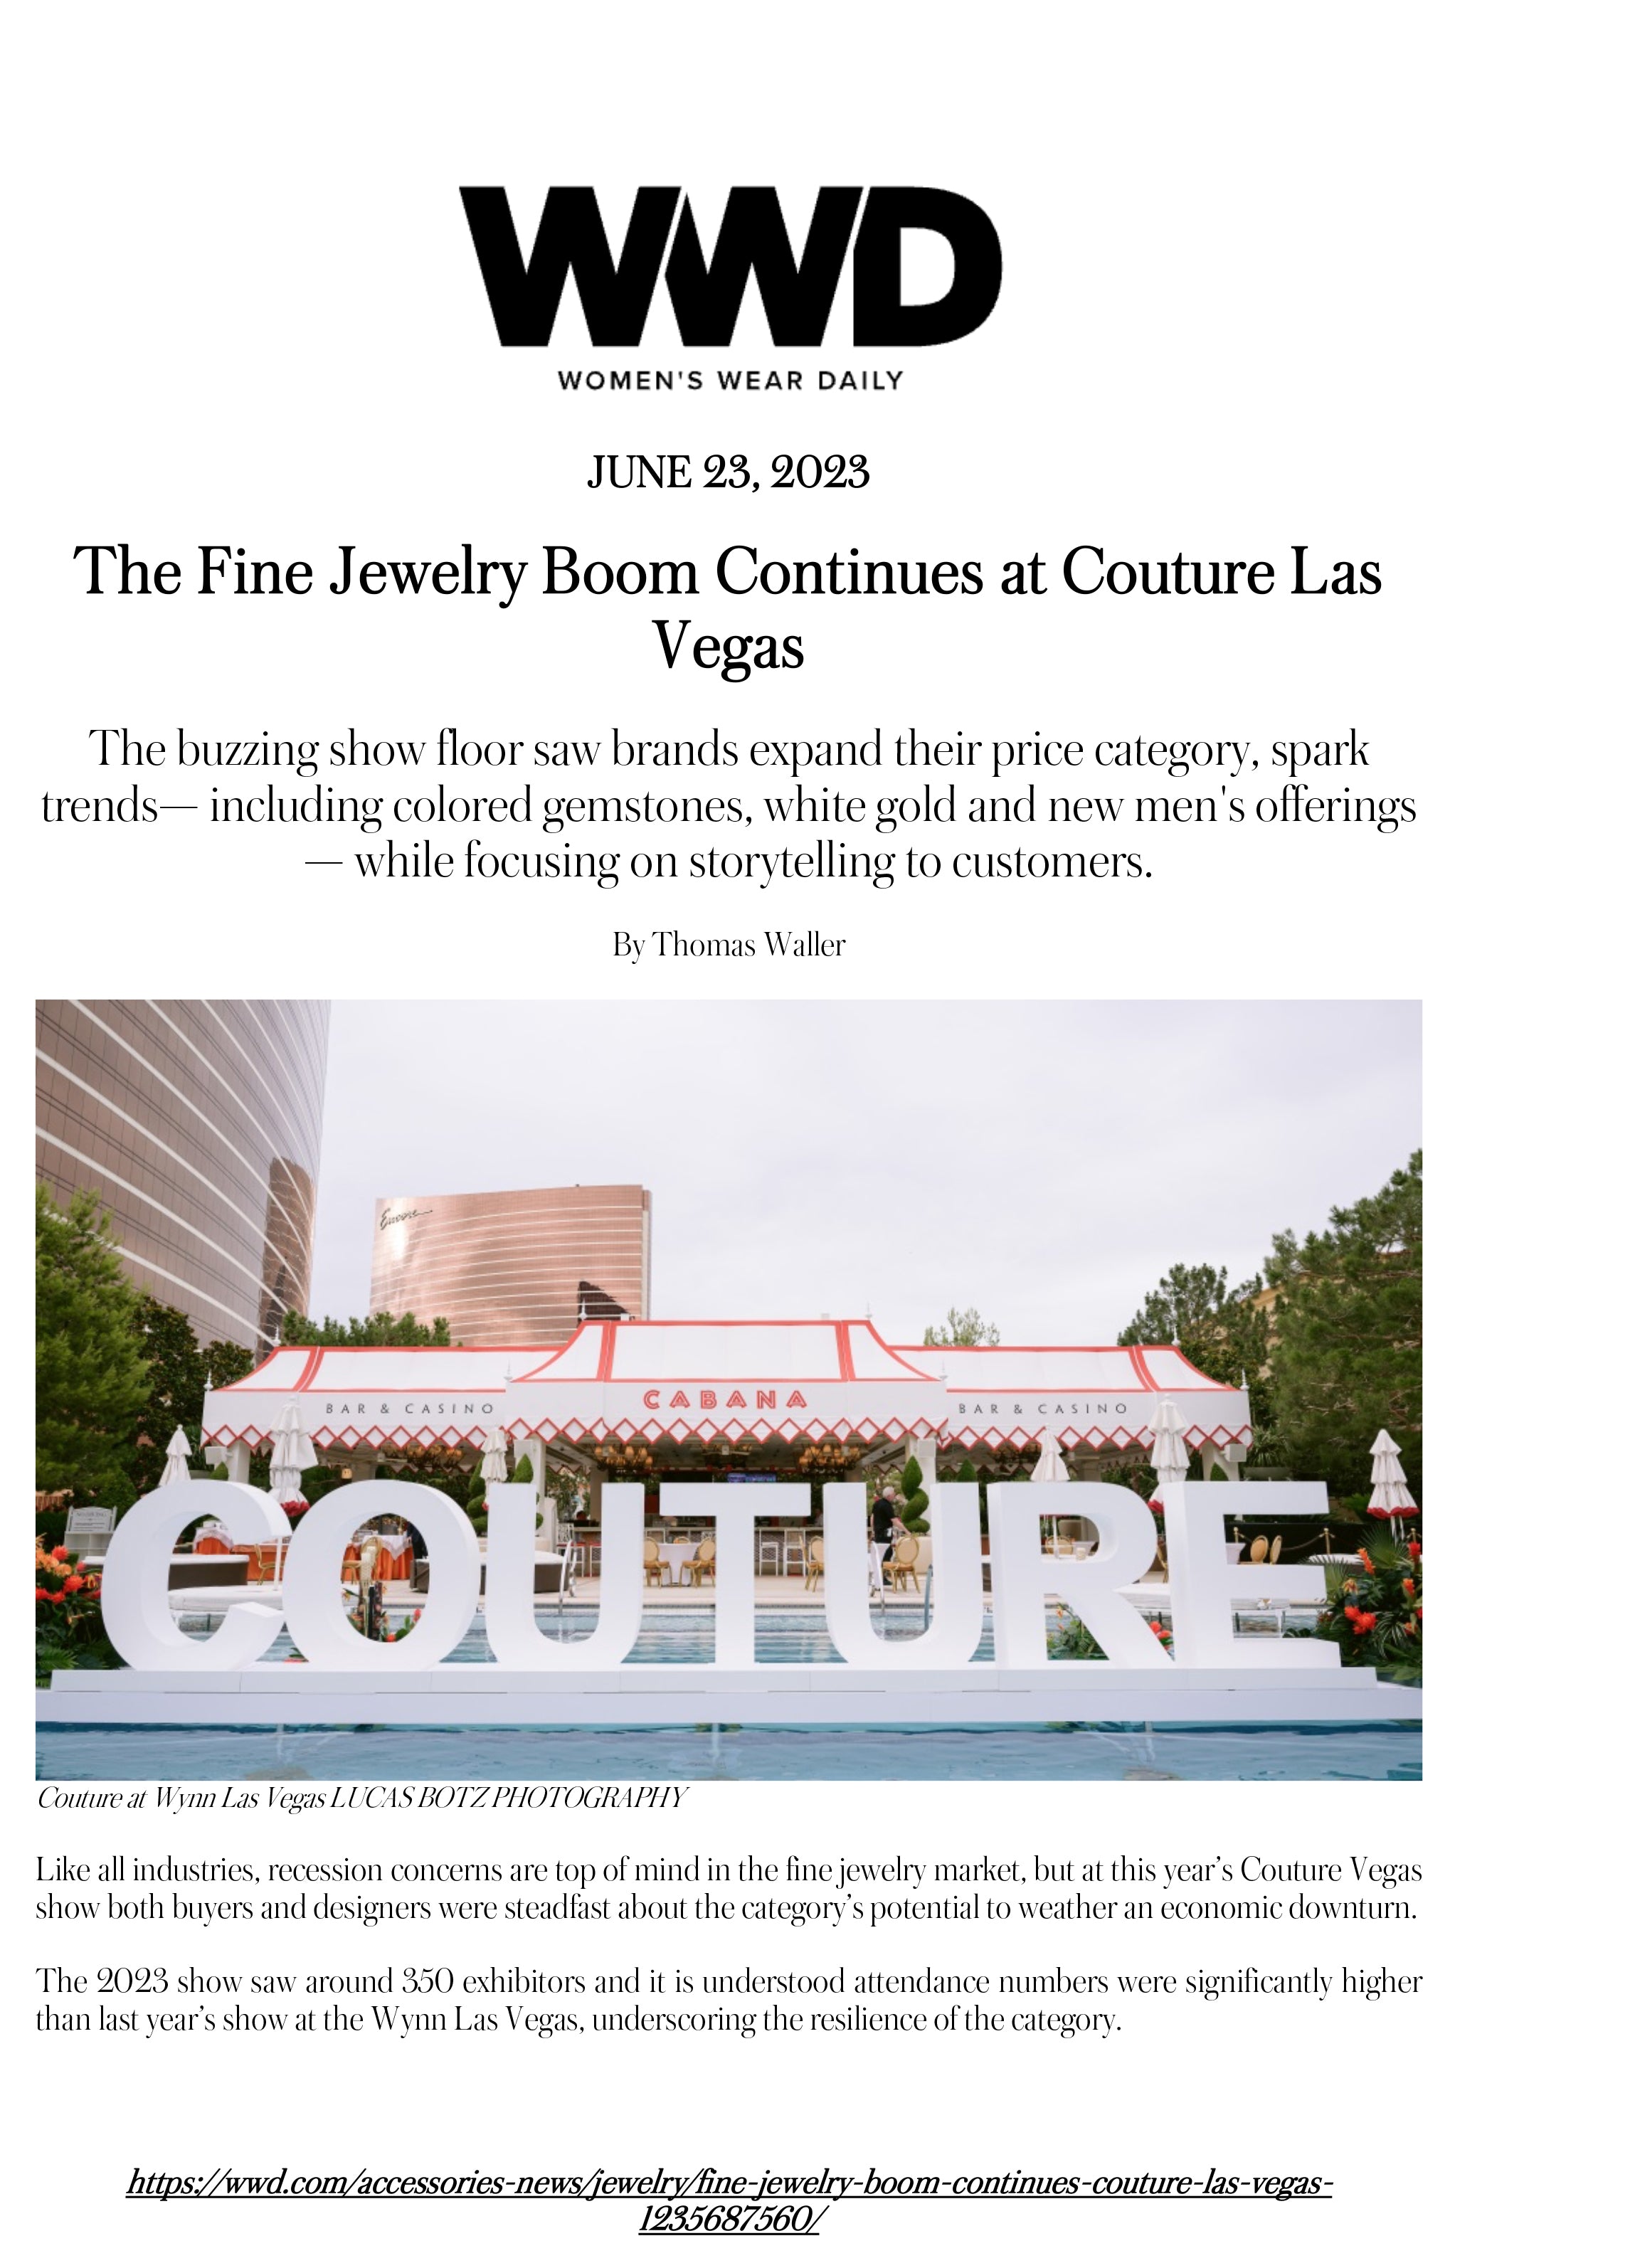 WWD, The Fine Jewelry Boom Continues at Couture